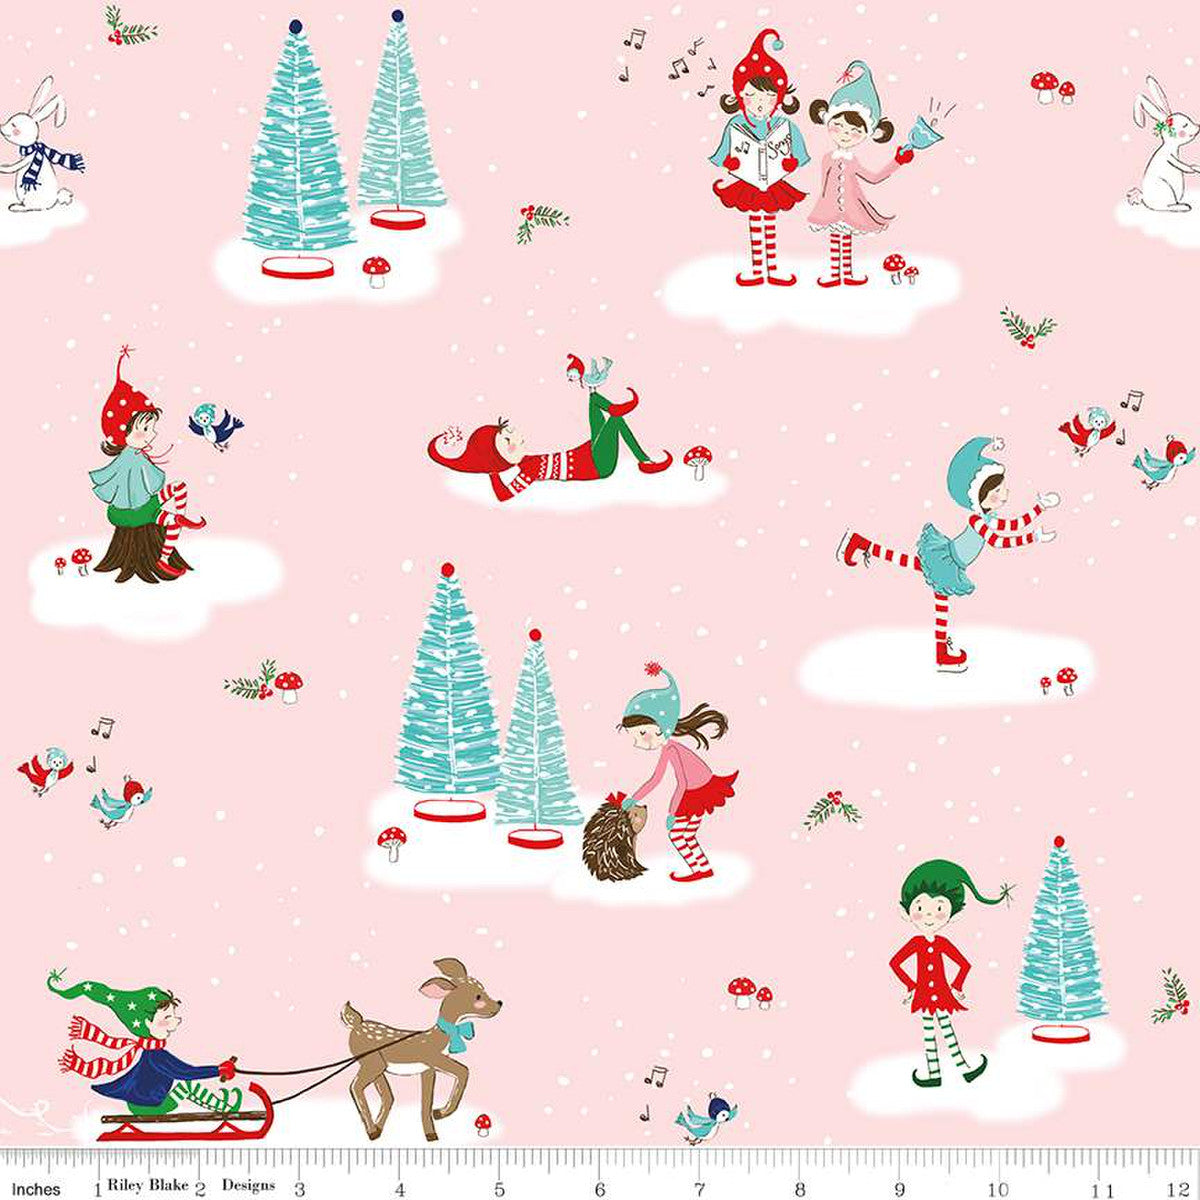 Manufacturer: Riley Blake Designs Designer: Tasha Noel Collection: Pixie Noel 2 Print Name: Main in Pink Material: 100% Cotton  Weight: Quilting  SKU: C12110-PINK Width: 44 inches